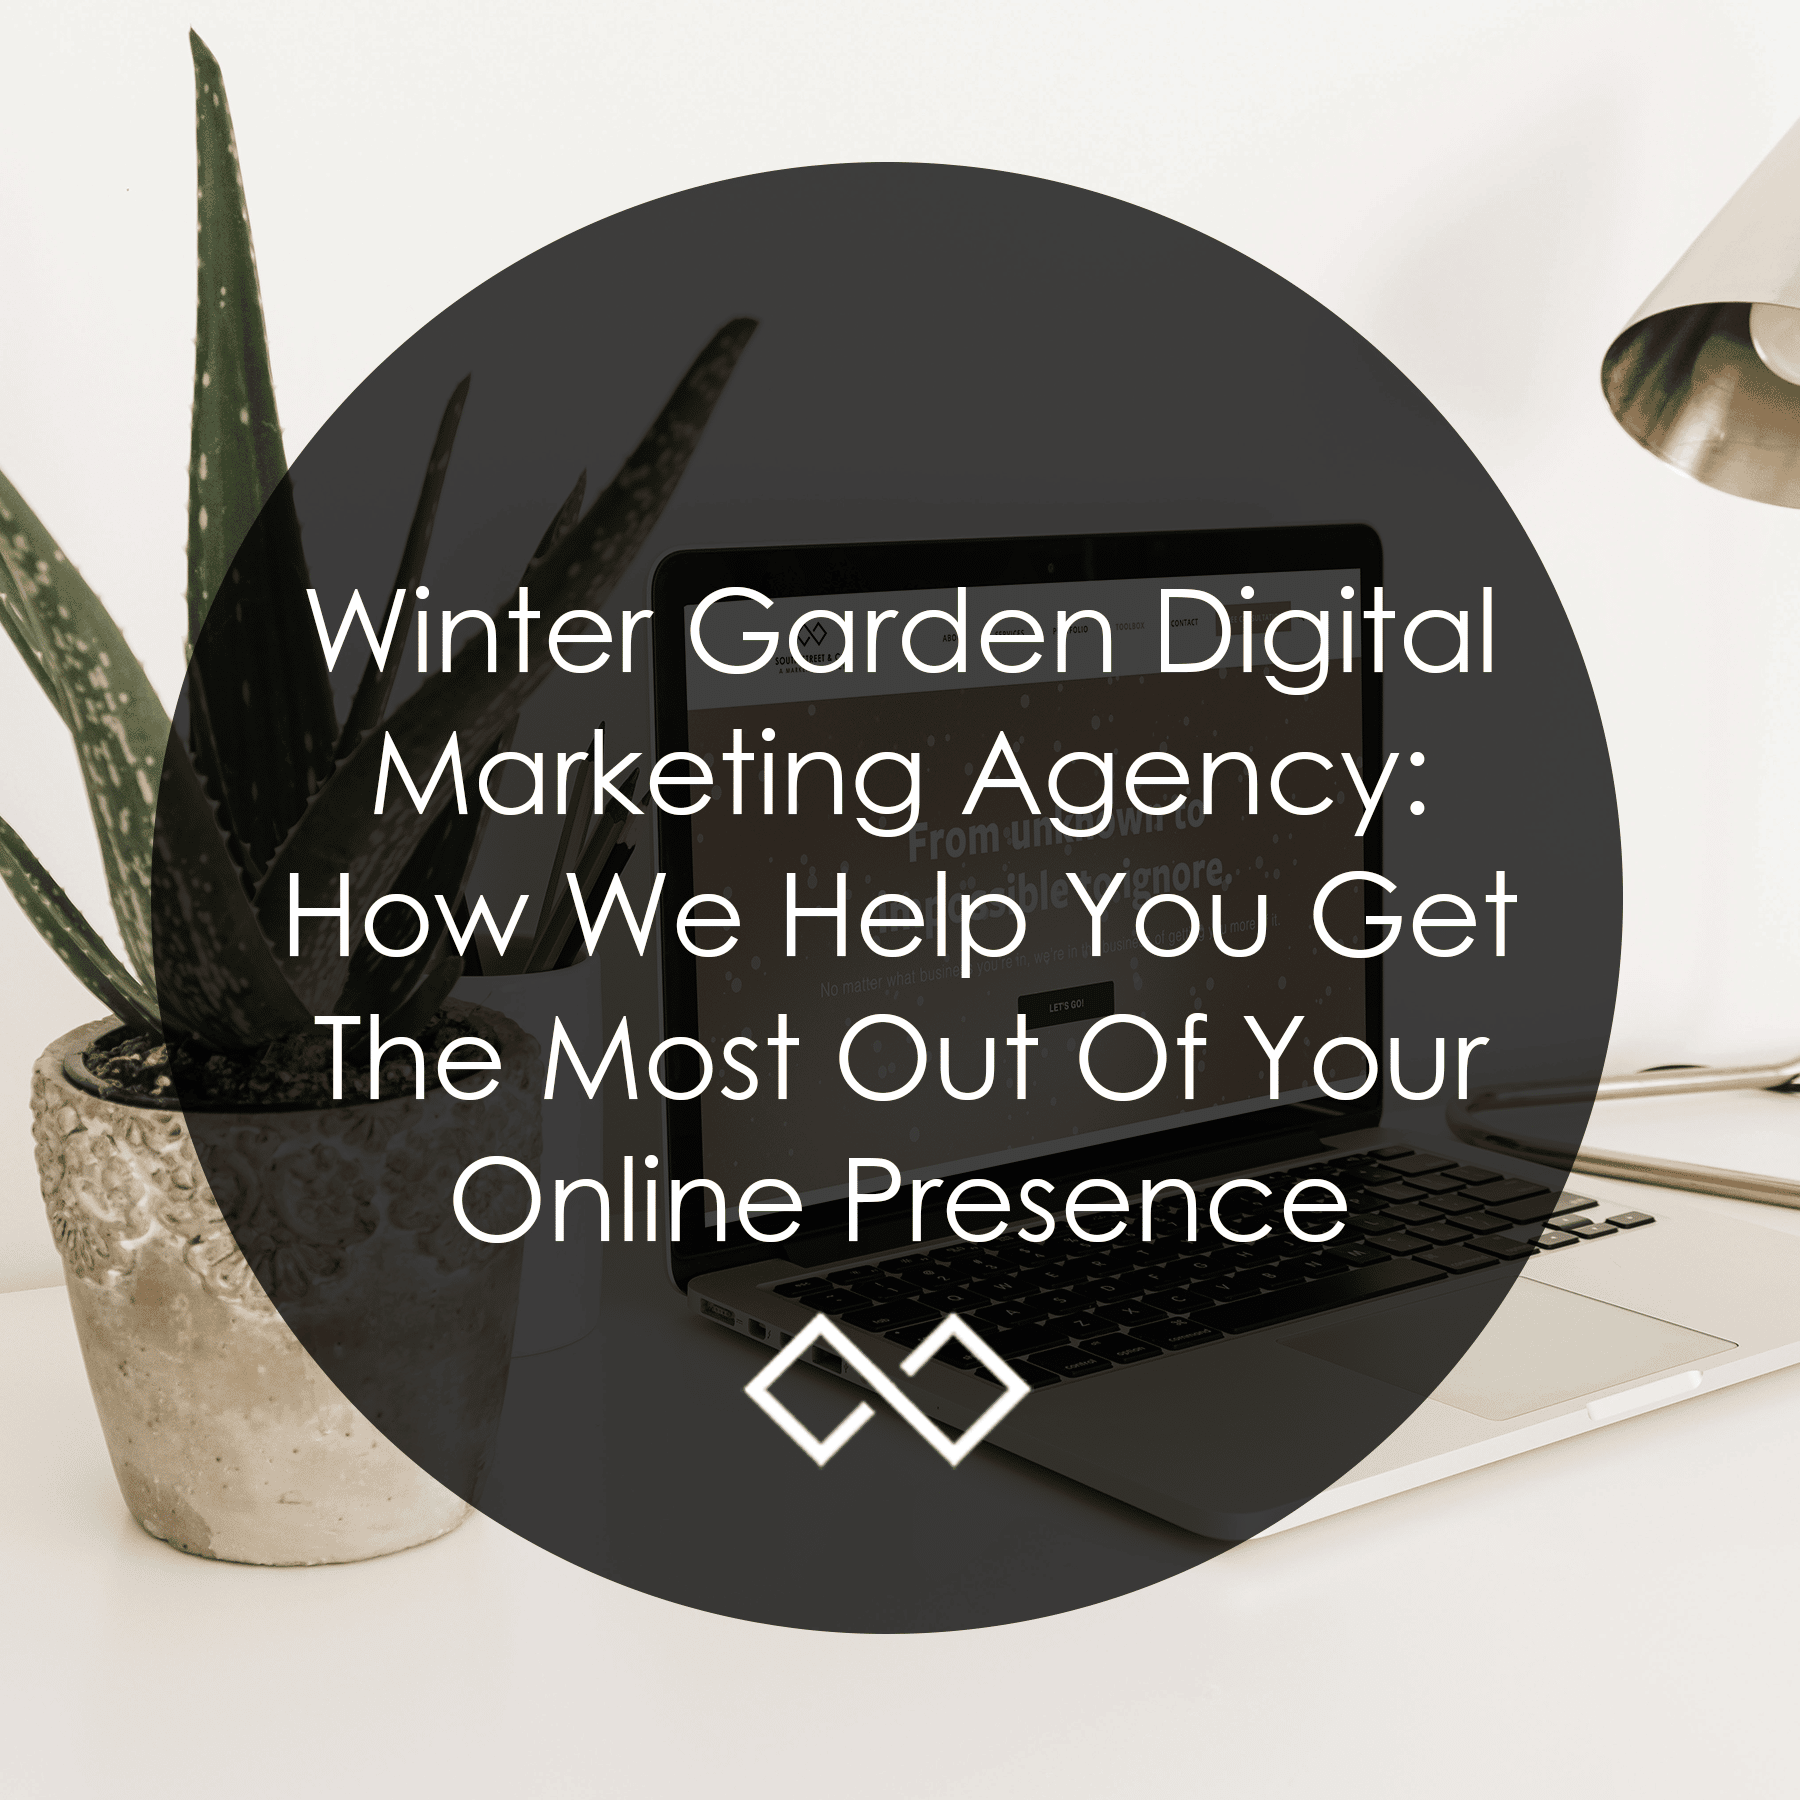 Winter Garden Digital Marketing Agency: How We Help You Get The Most Out Of Your Online Presence